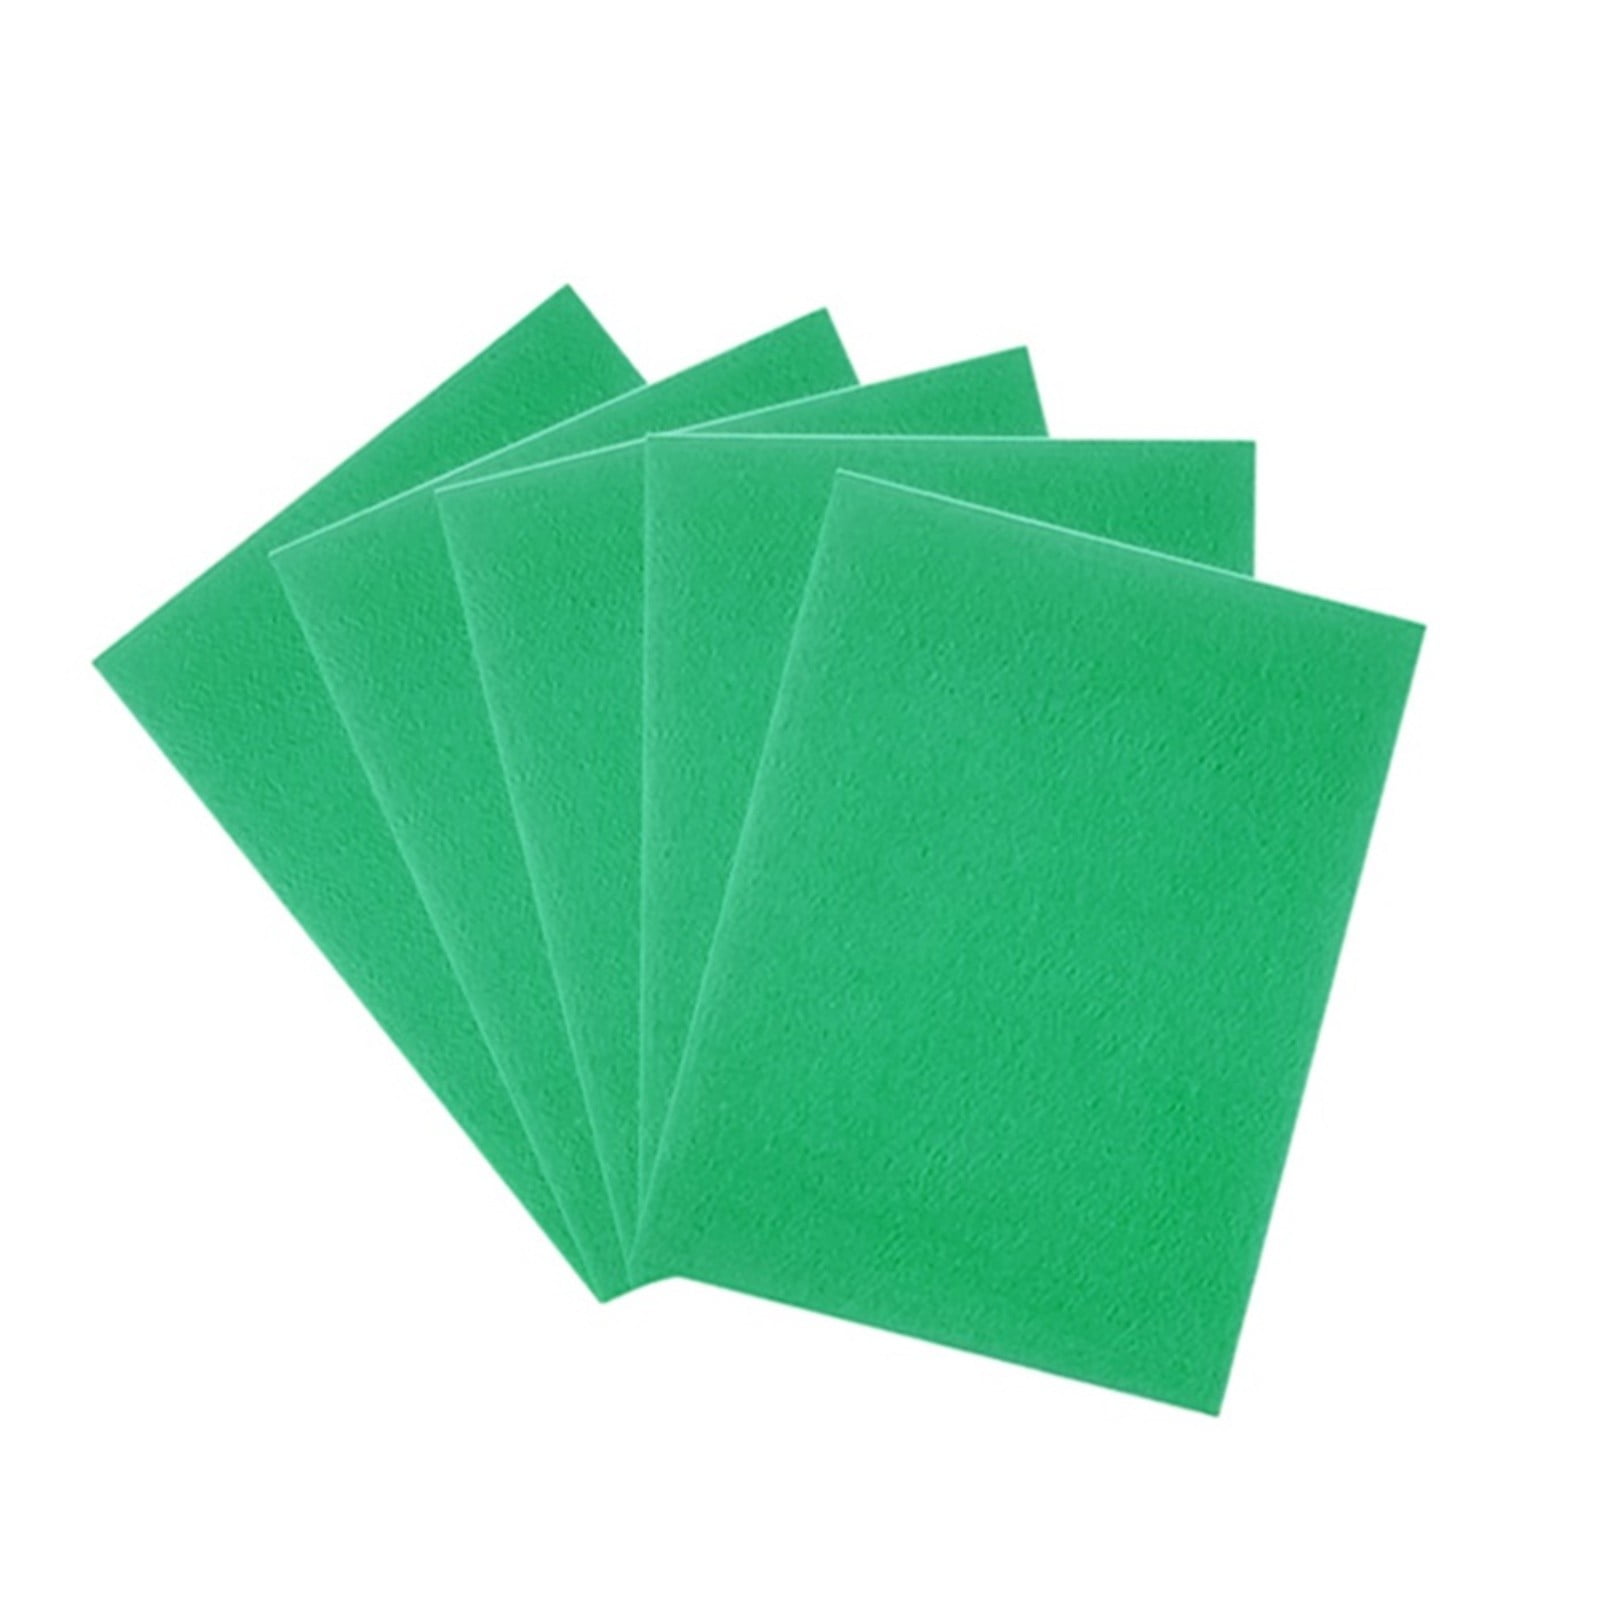  Remarkable U Stiff Felt Sheets for Crafts, 9x12 inches, 3mm  Thick Green Craft Fabric, Hard Felt Pieces for Kids, Crafting, Sewing, Art  Projects